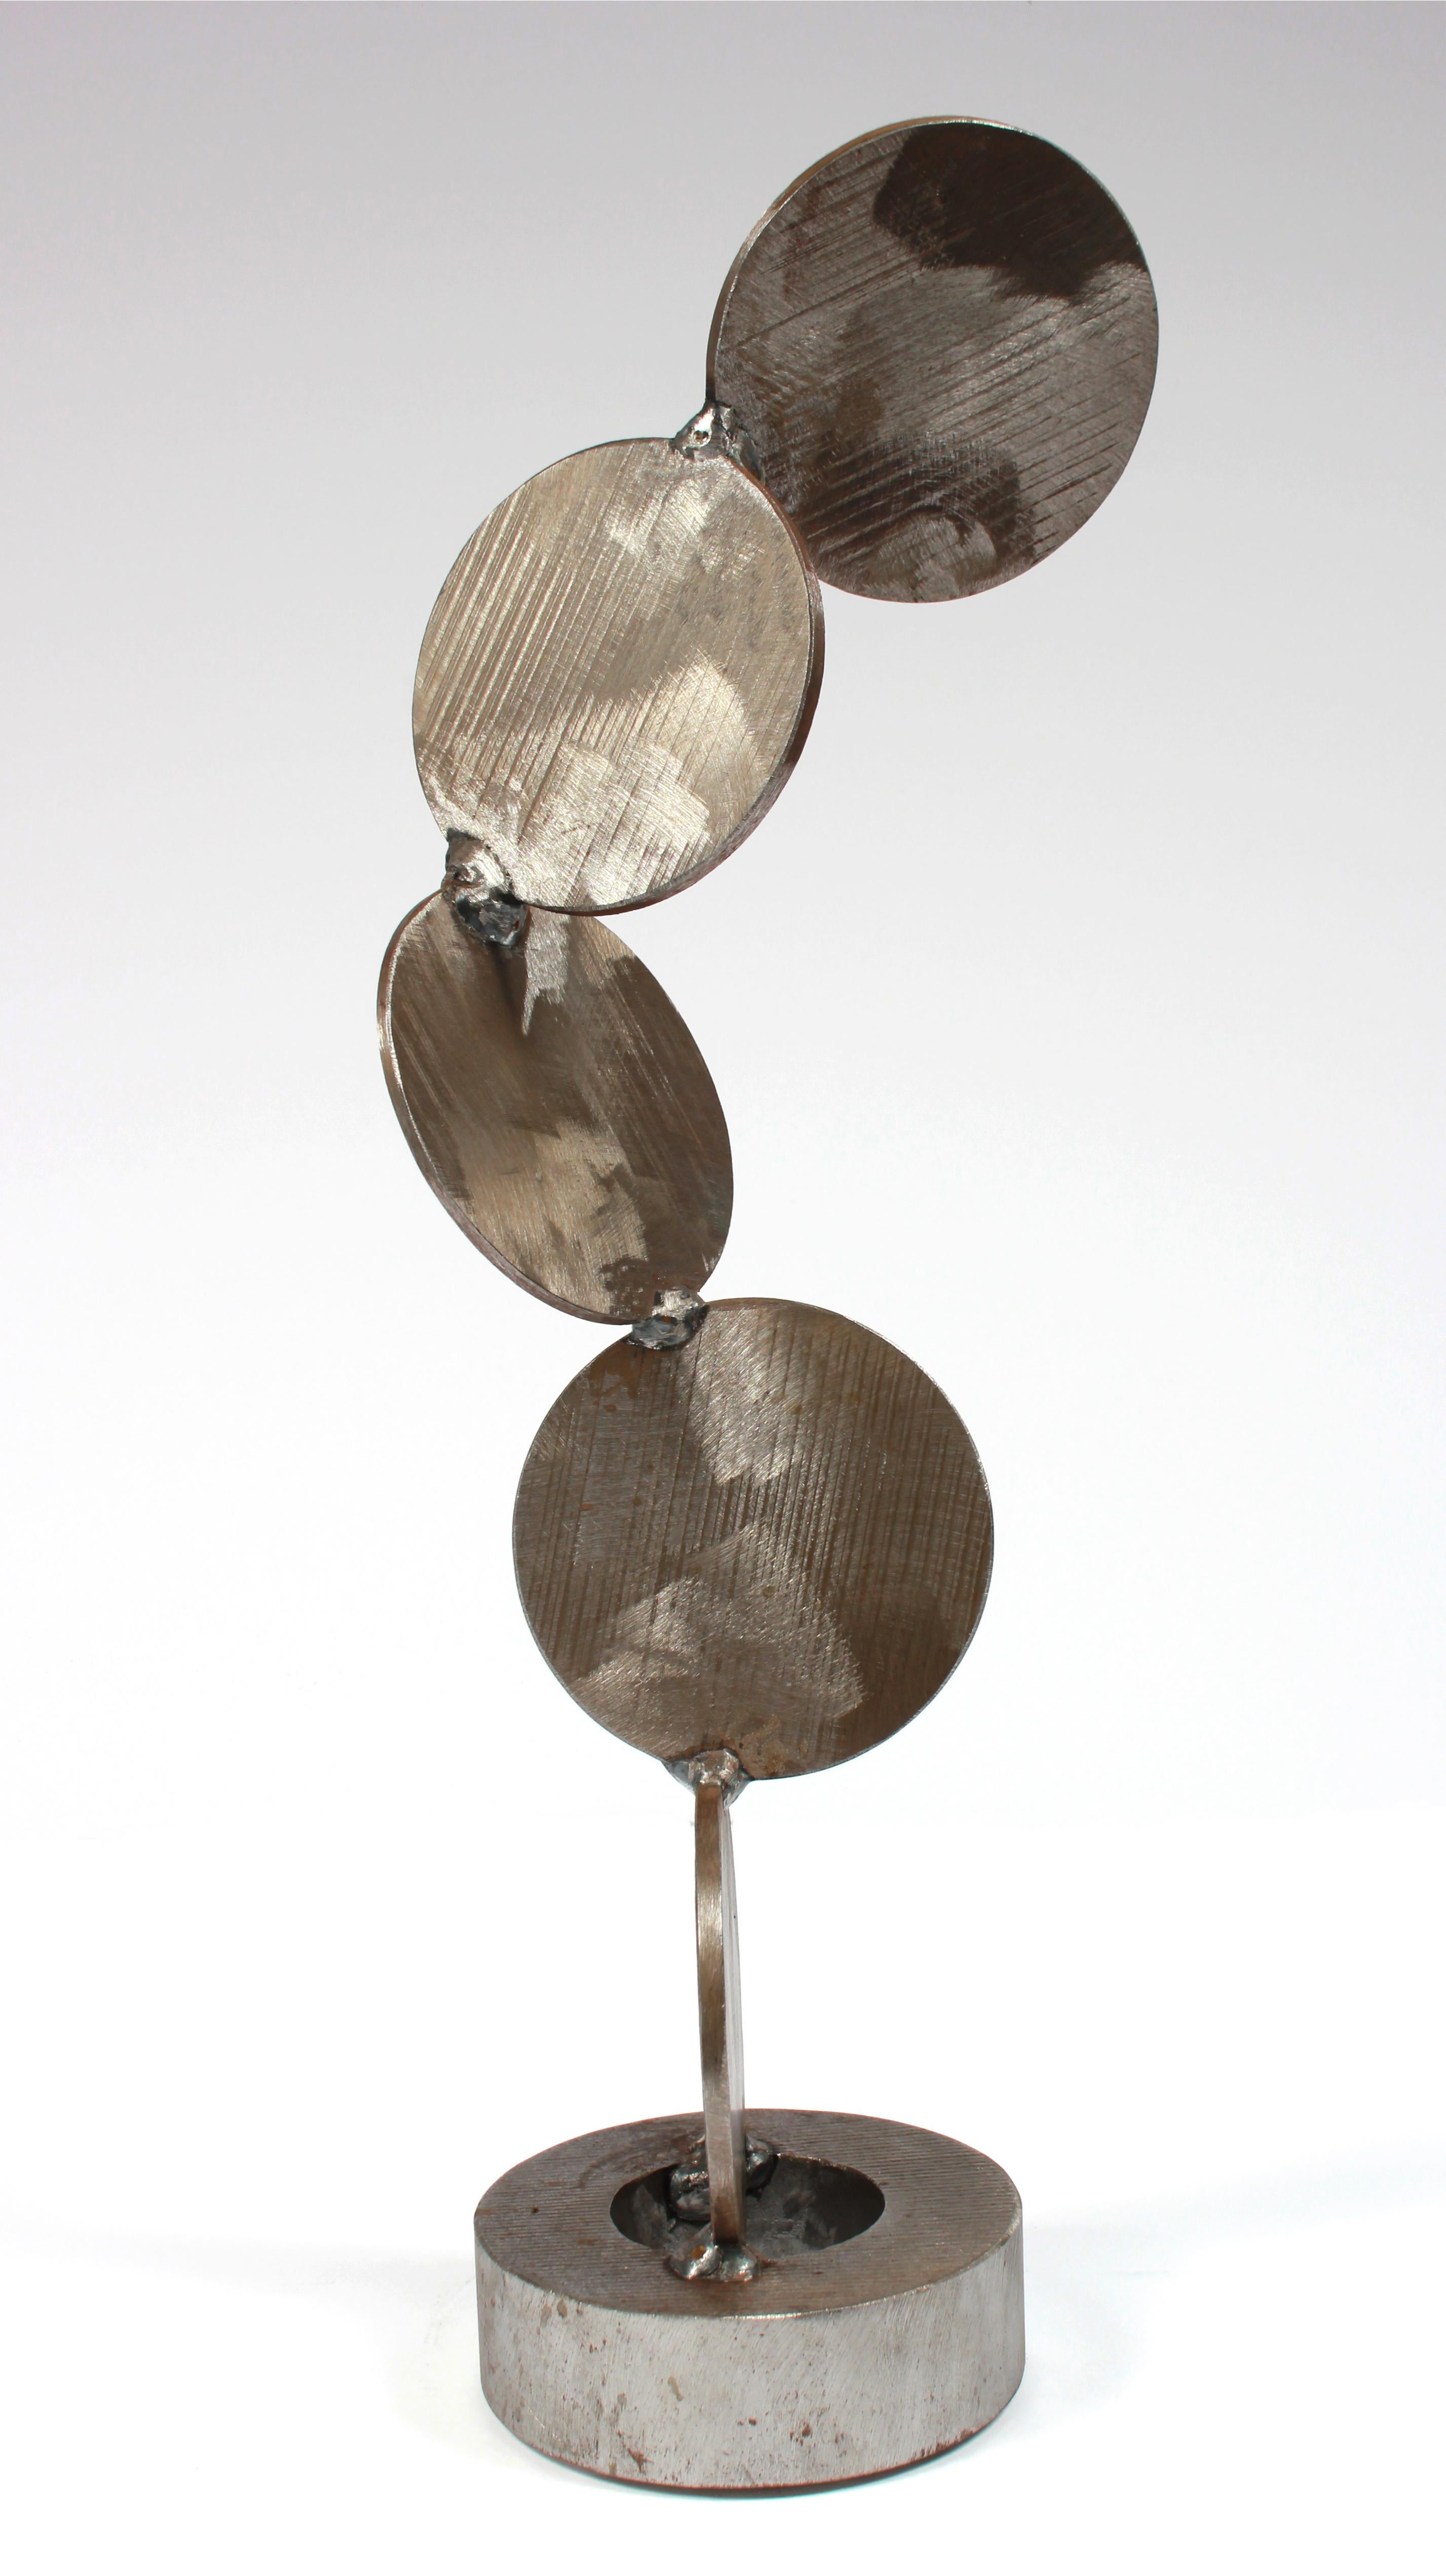 Unknown Abstract Sculpture - "Four Disks" Welded Steel Sculpture